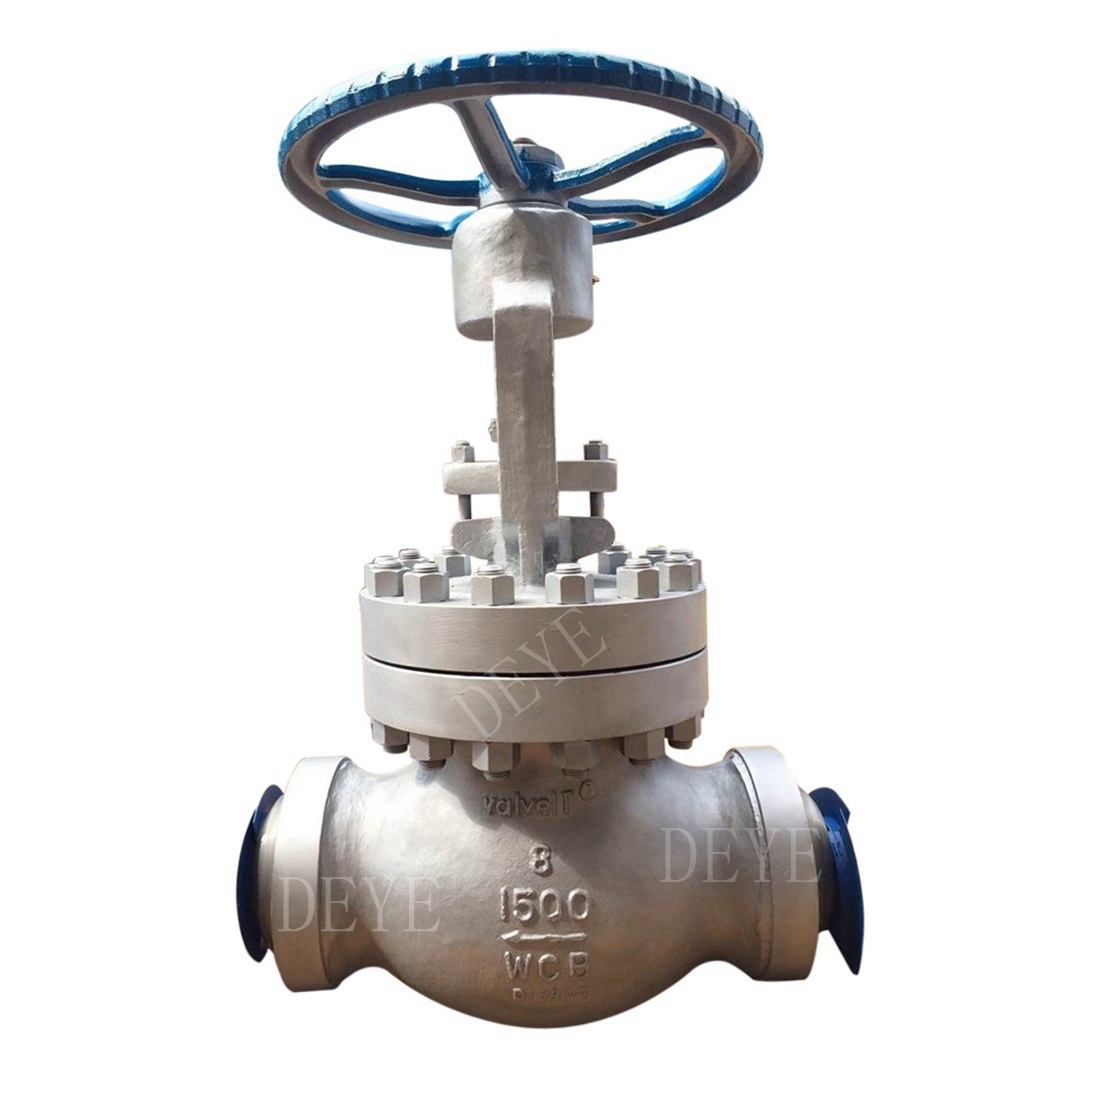 Top Suppliers Resilient Butterfly Valve -
 carbon steel A216 WCB 1500LBS Globe Valve GVC-001500 – Deye